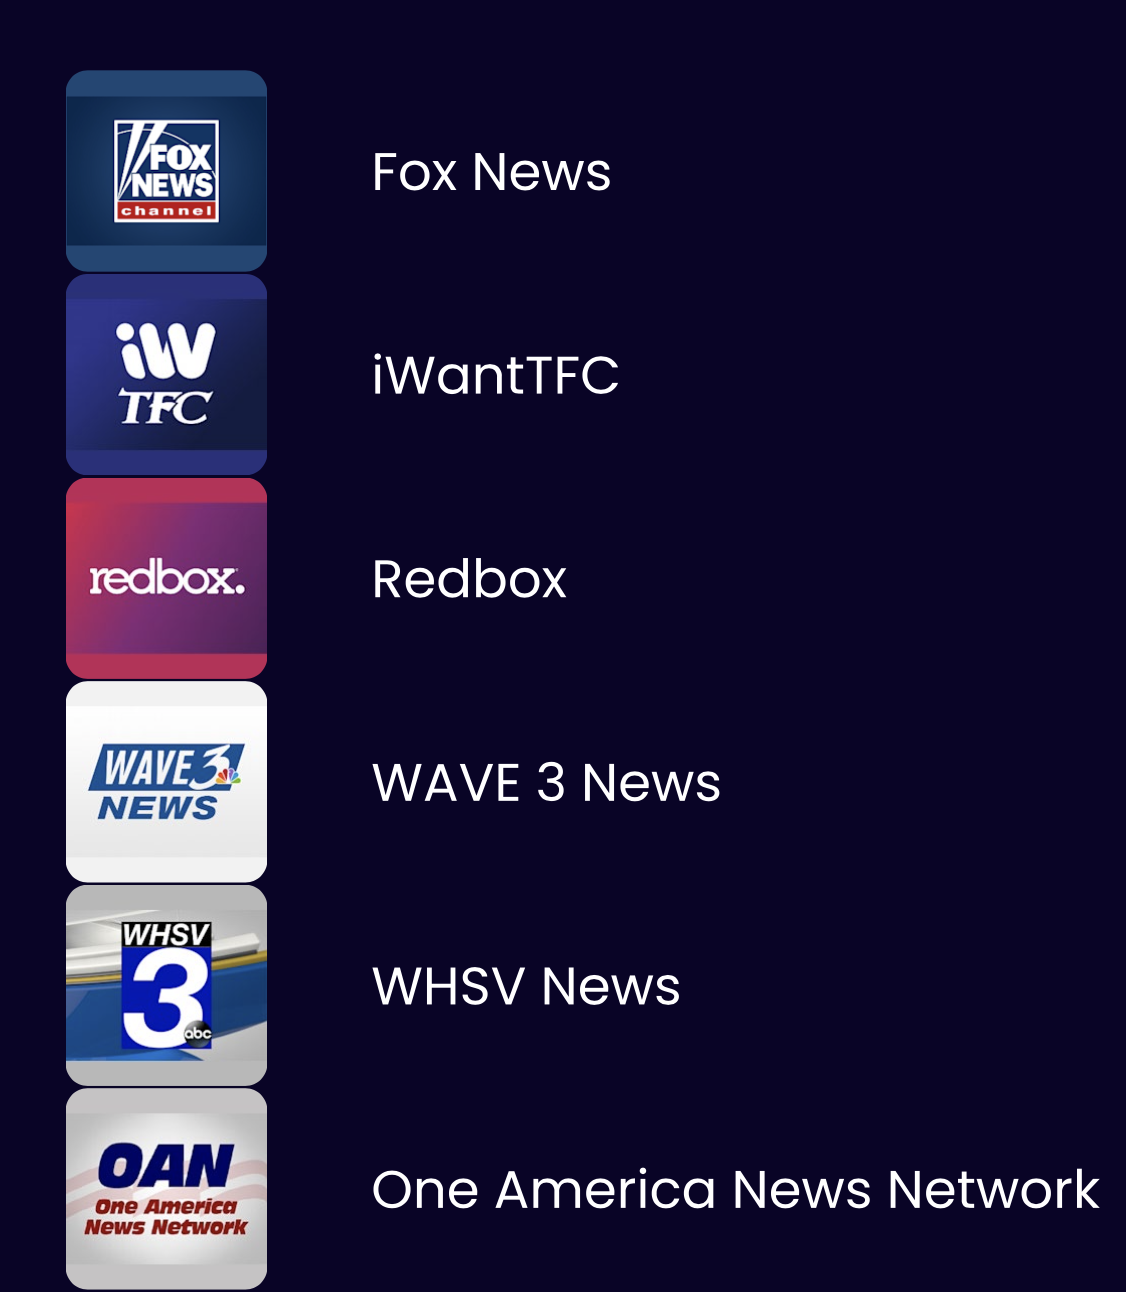 connected TV advertising on local channelson FOX NEWS